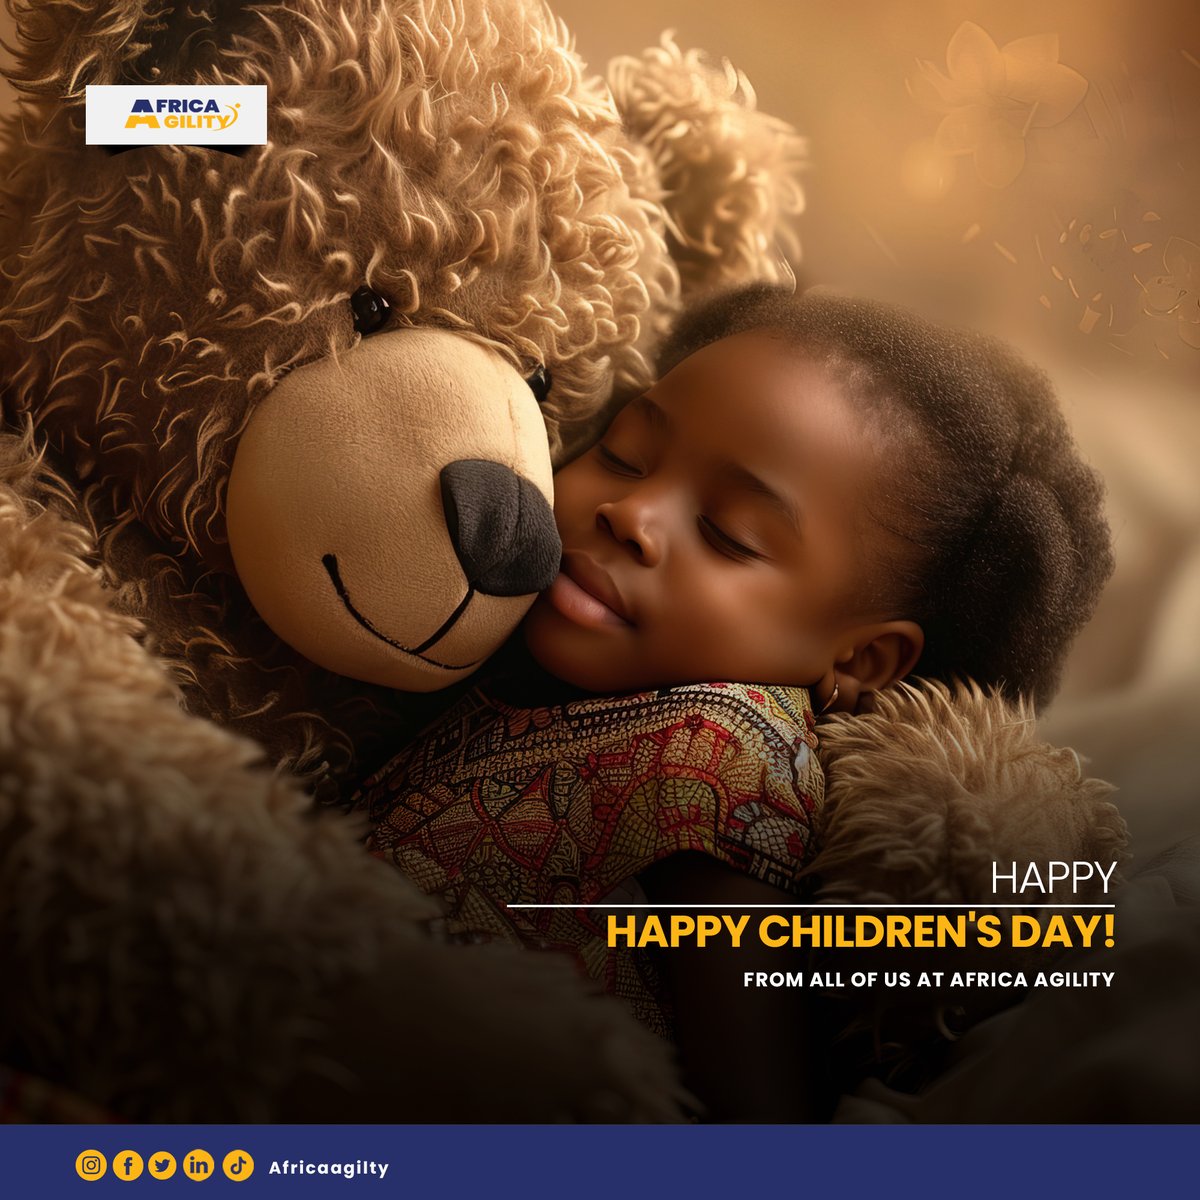 To all the bright, curious, and joyful children, today is all about celebrating you!

Keep shining, keep dreaming, and never stop being awesome.

Celebrating the next generation of tech superstars.

🎉 Happy Children's Day! 

#Africaagility #HappyChildrensDay #FutureTechStars